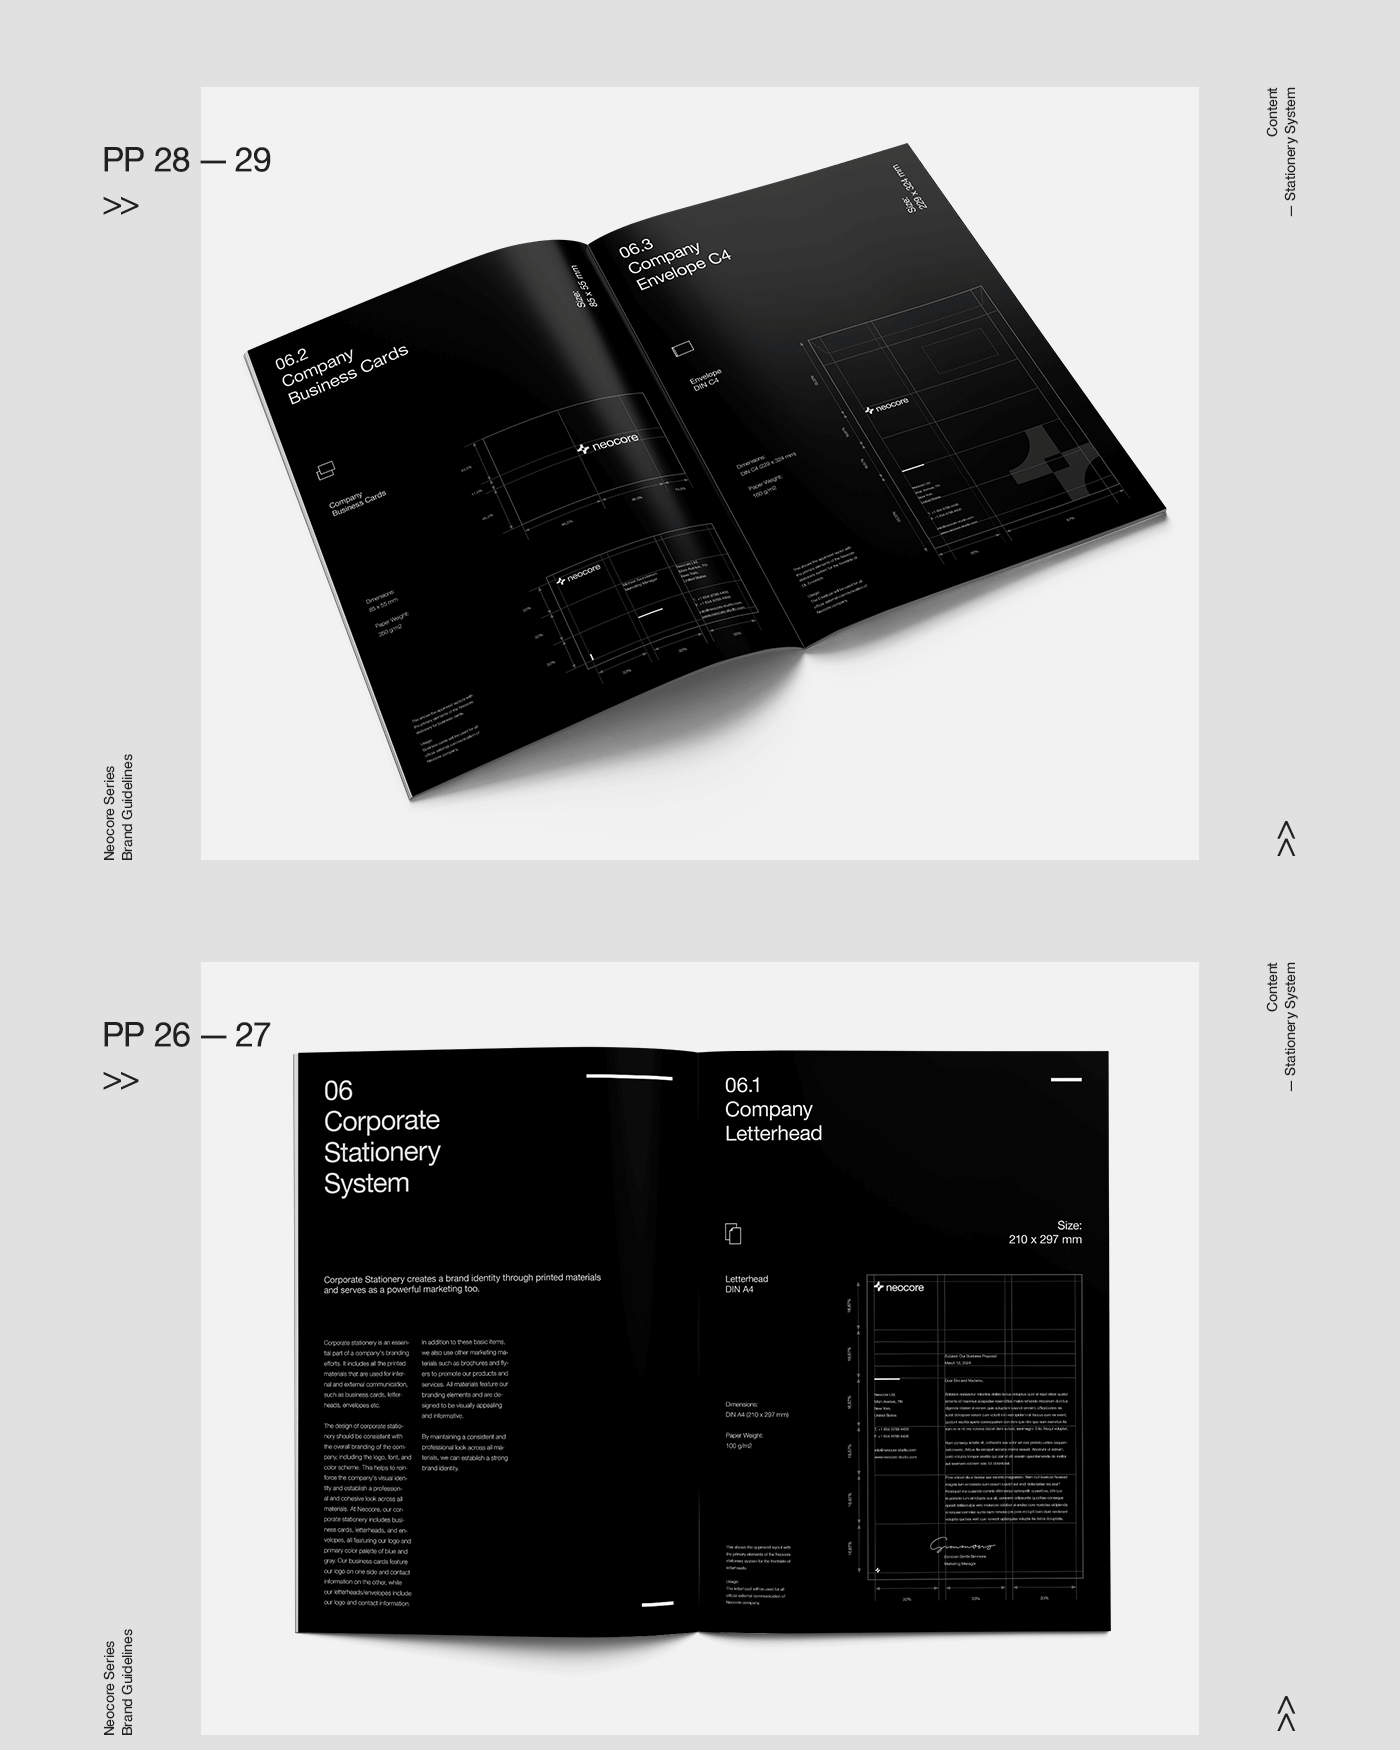 Preview of Stationery Section of the Brand Guidelines